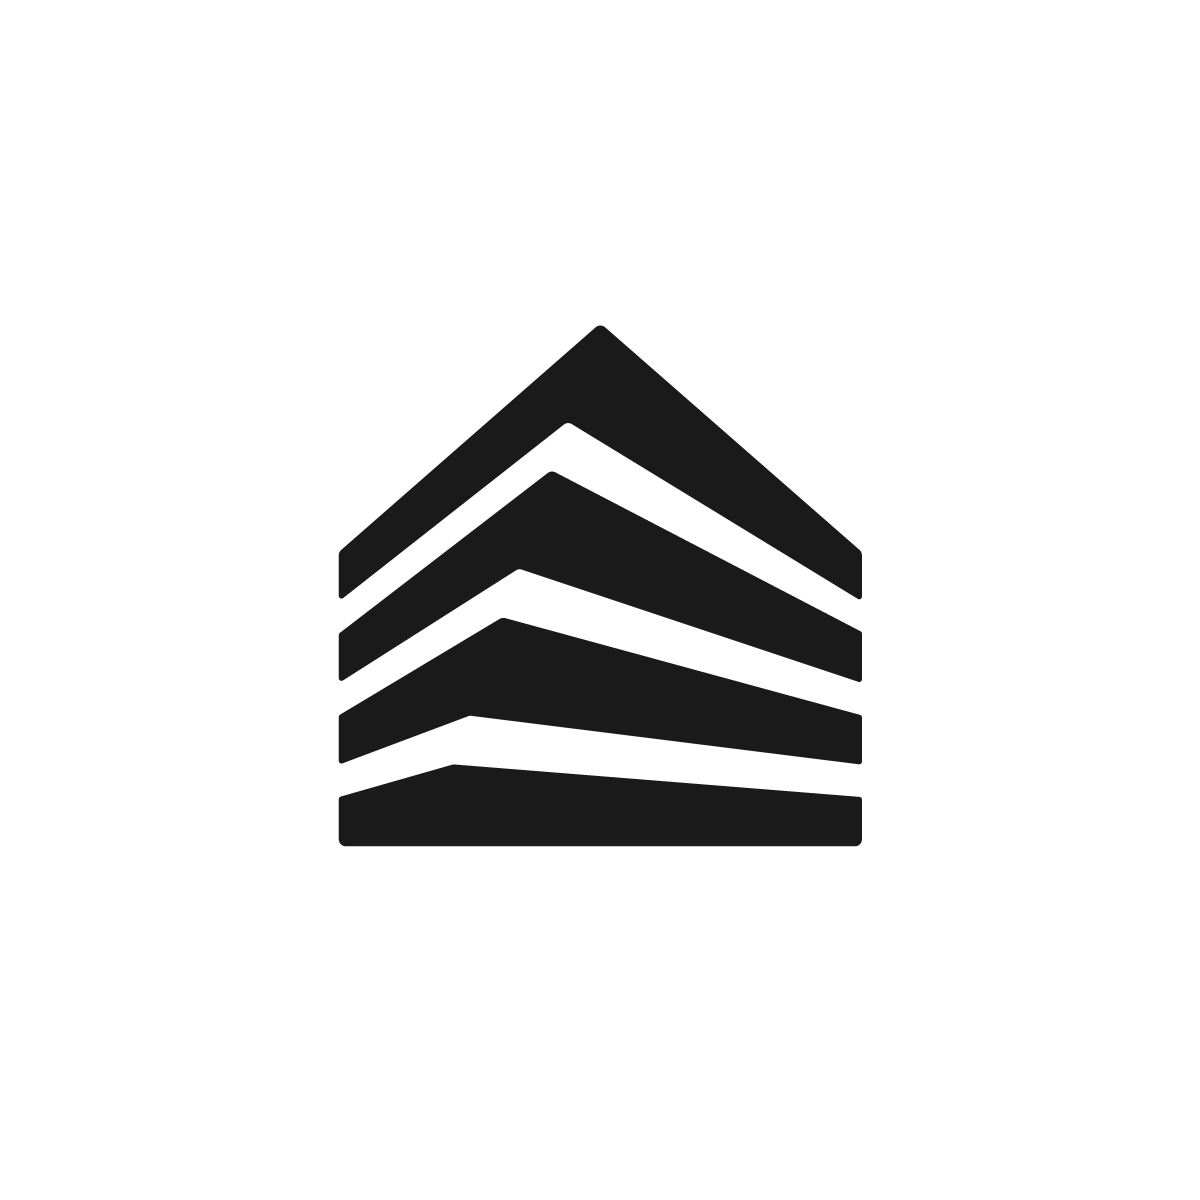 Growth House Logo creatively merges four arrows forming a house outline, symbolizing growth, progress, stability, and ambition, ideal for real estate agencies and property developers